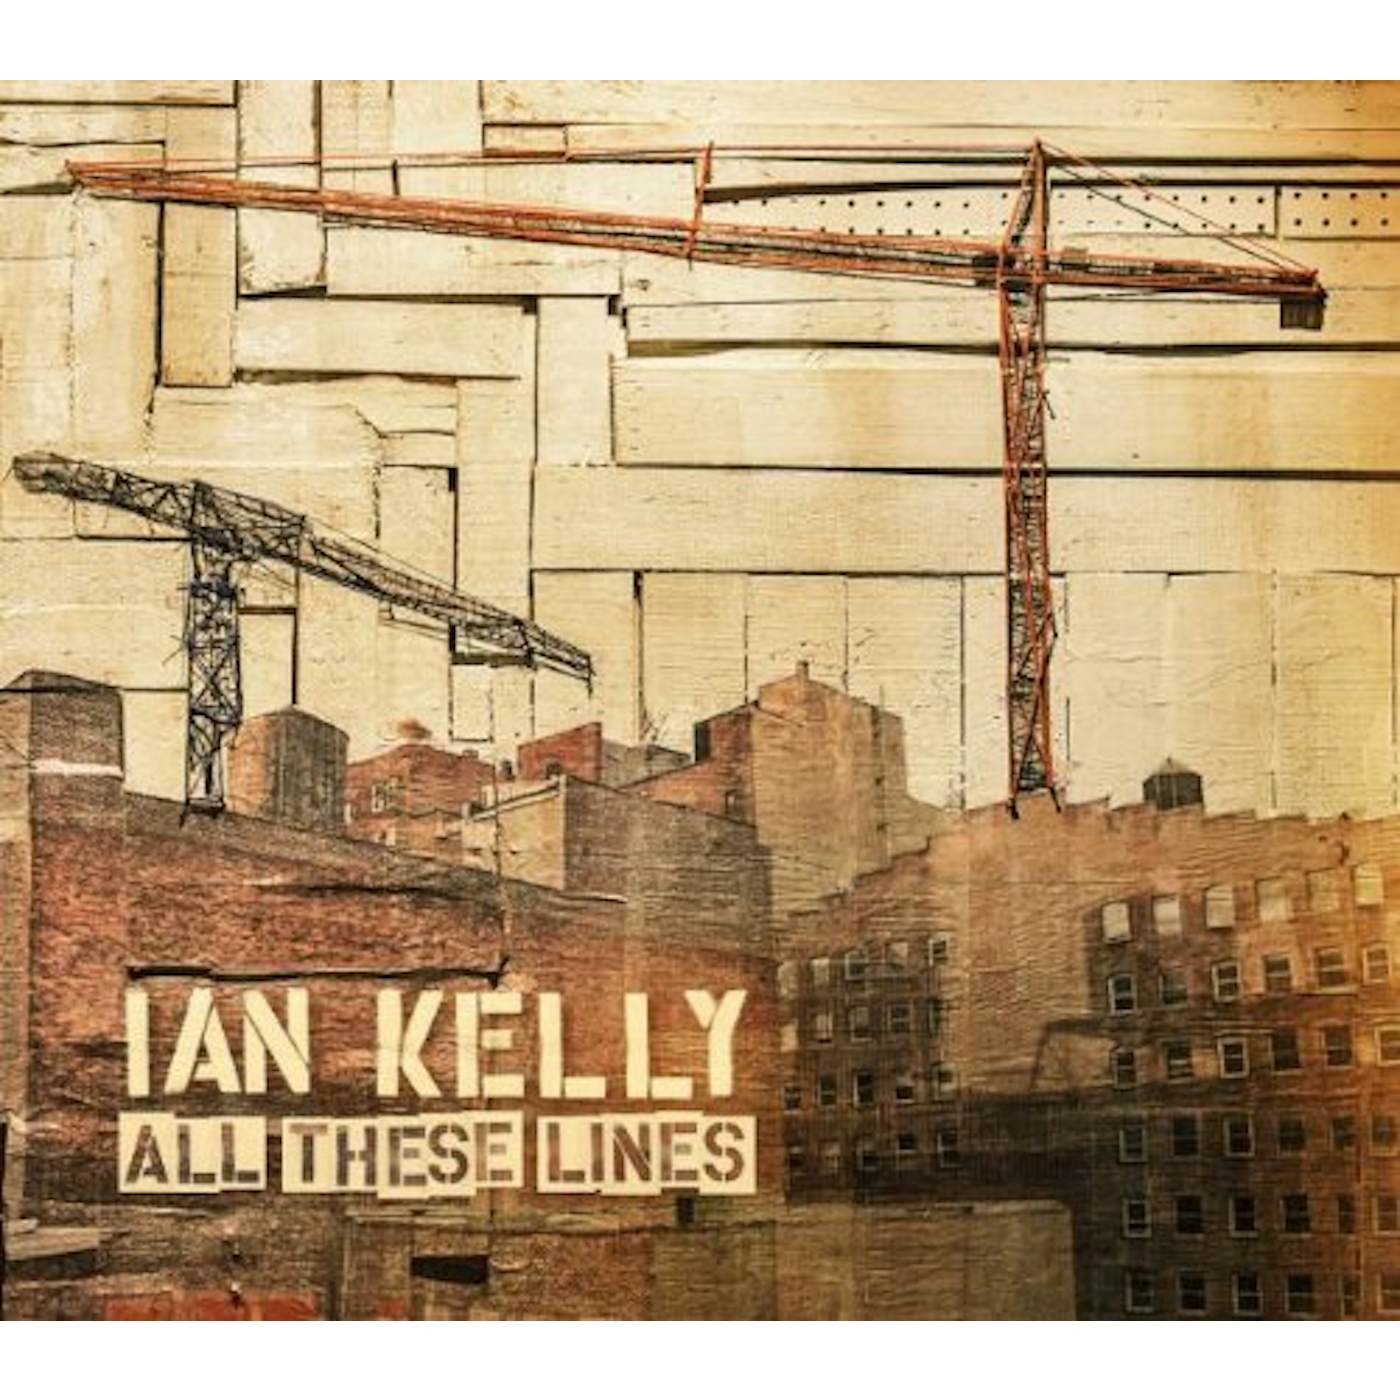 Ian Kelly All These Lines Vinyl Record